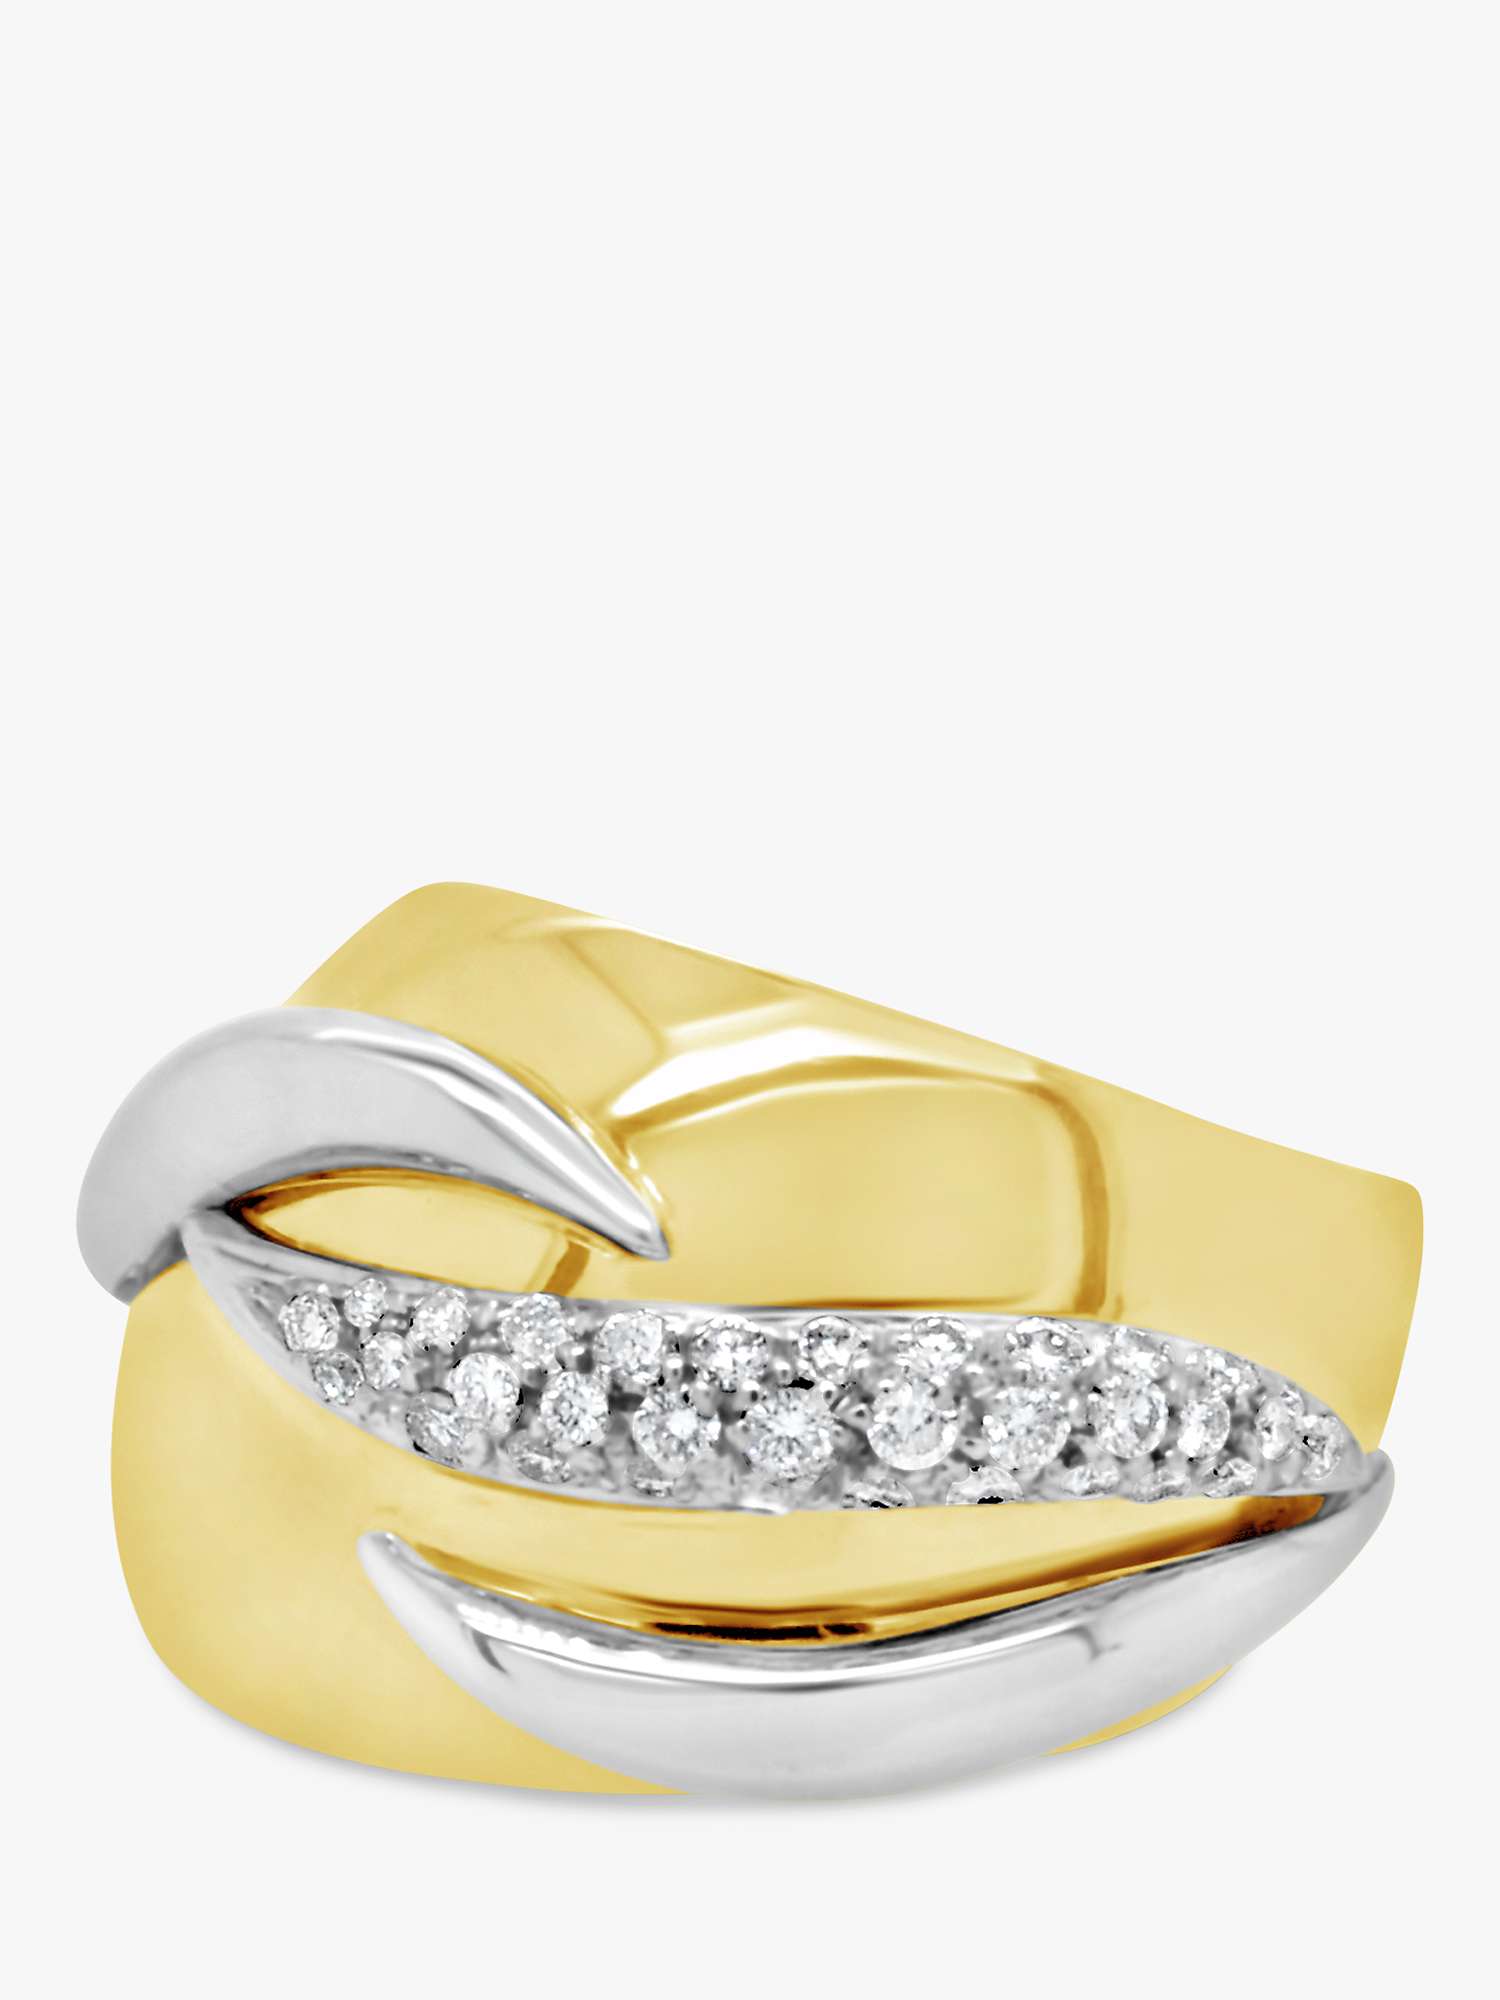 Buy Milton & Humble Jewellery Second Hand Wempe 18ct White & Yellow Gold Diamond Chunky Band Ring Online at johnlewis.com